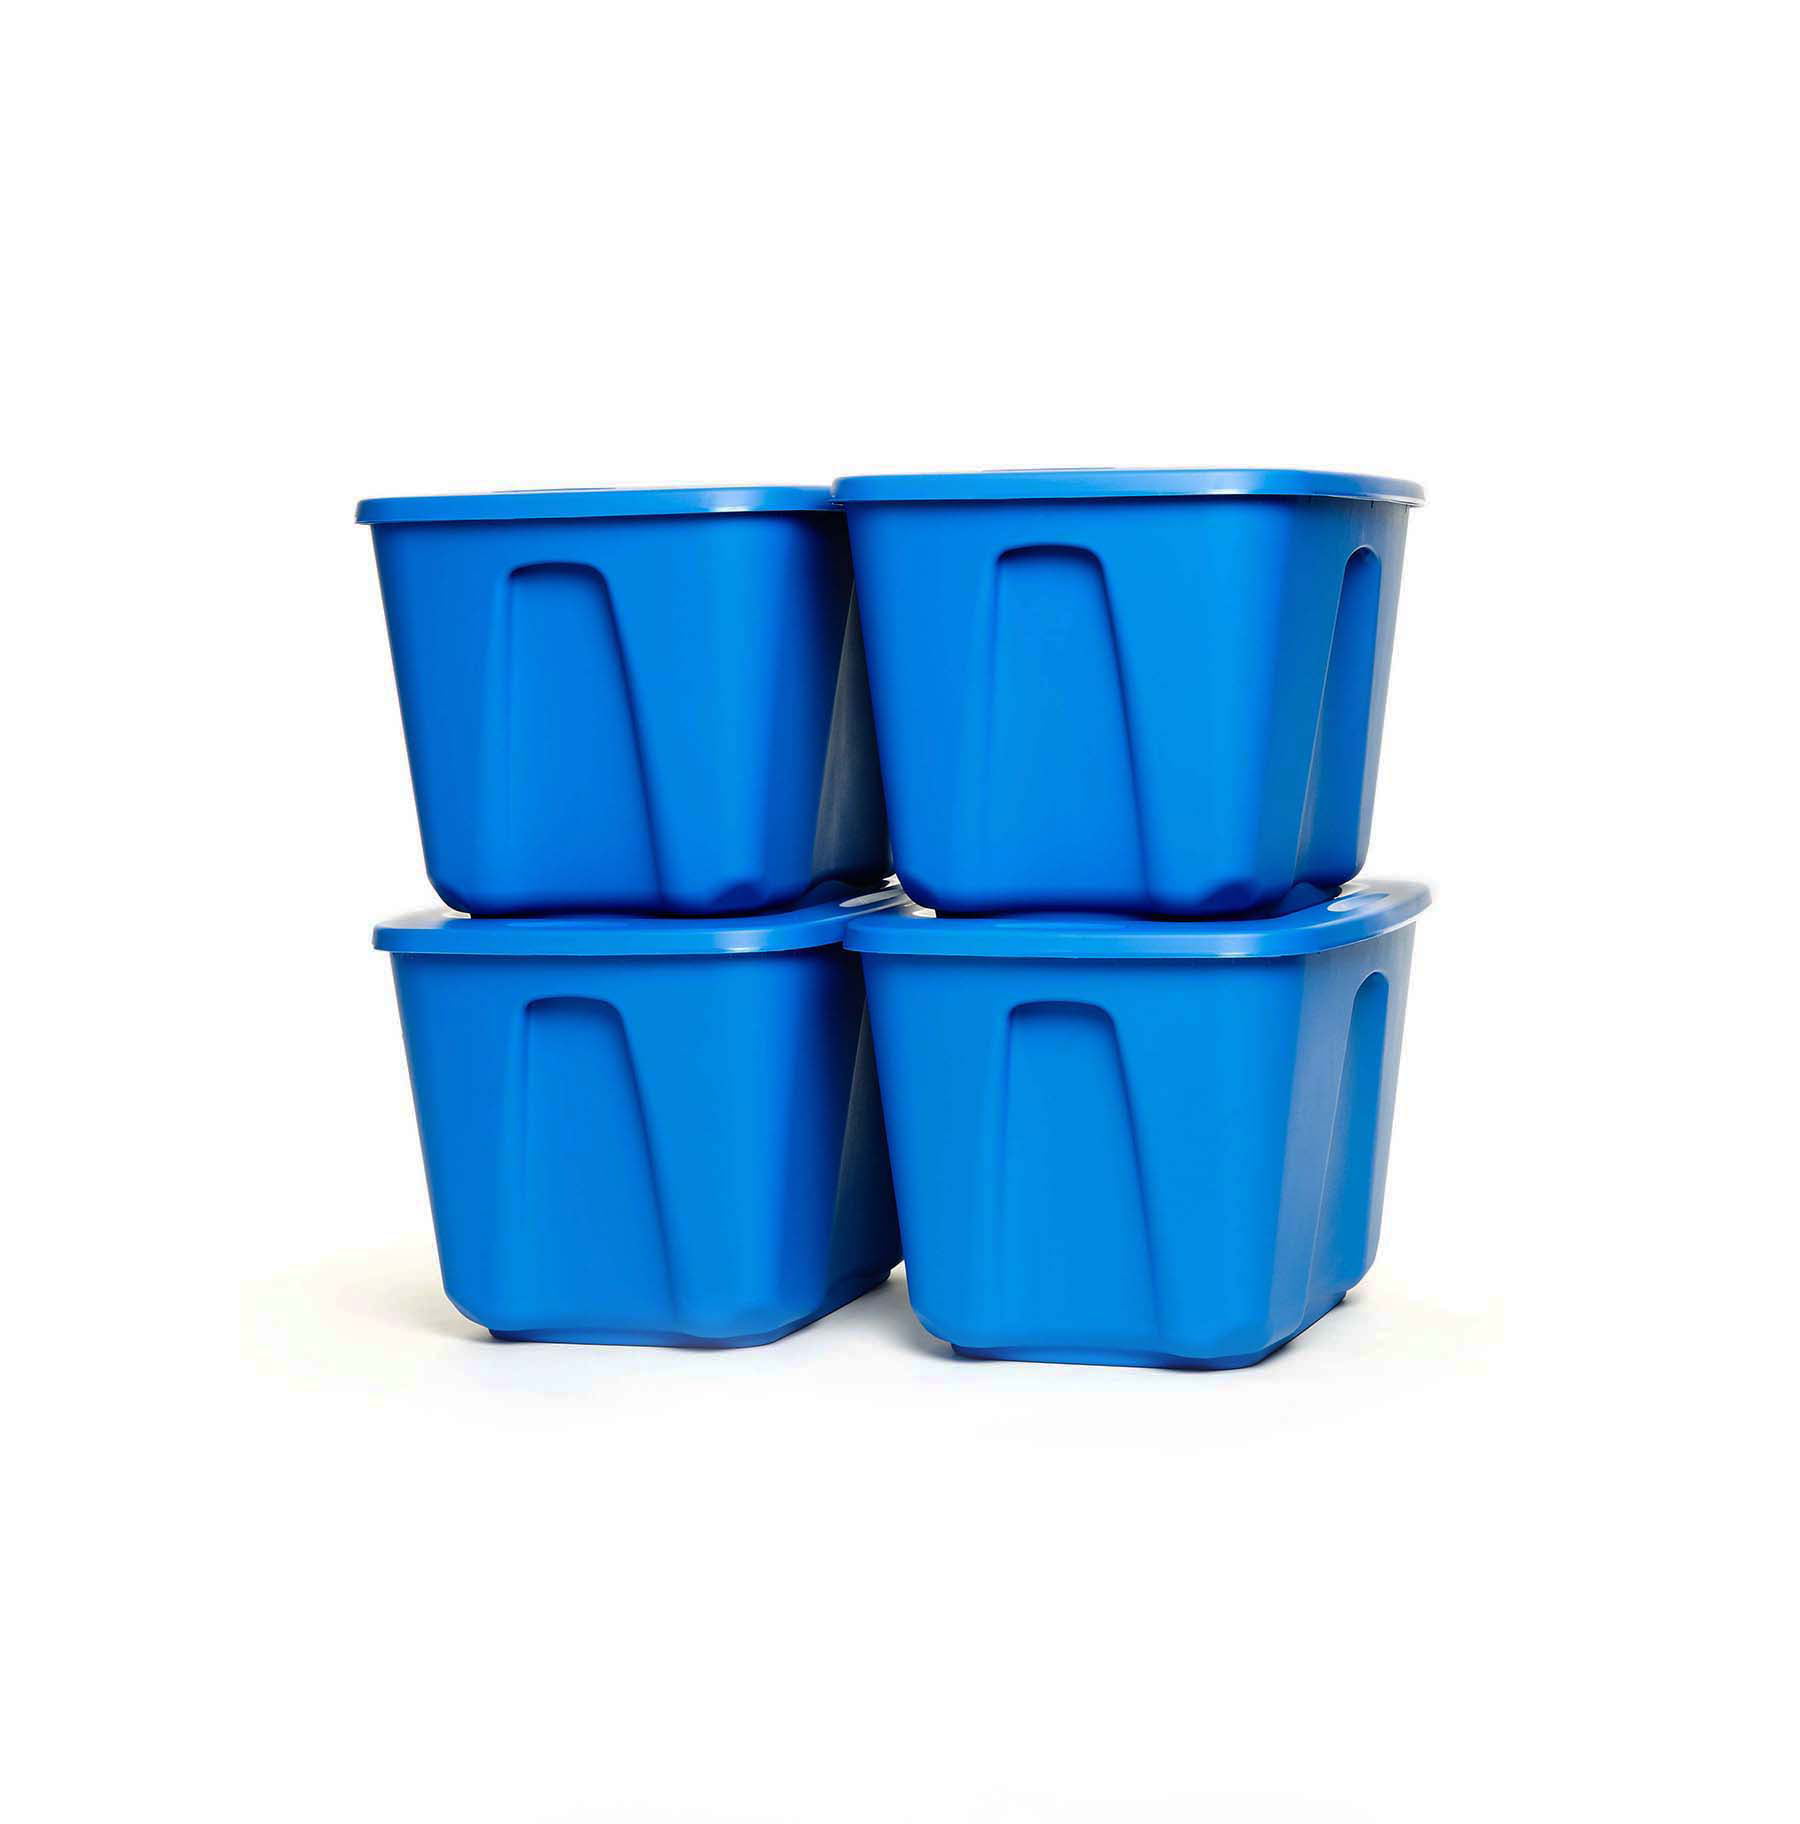  HOMZ 18 Gallon Medium Standard Stackable Plastic Storage  Container Bin with Secure Snap Lid for Home Organization, Blue, 4 Pack